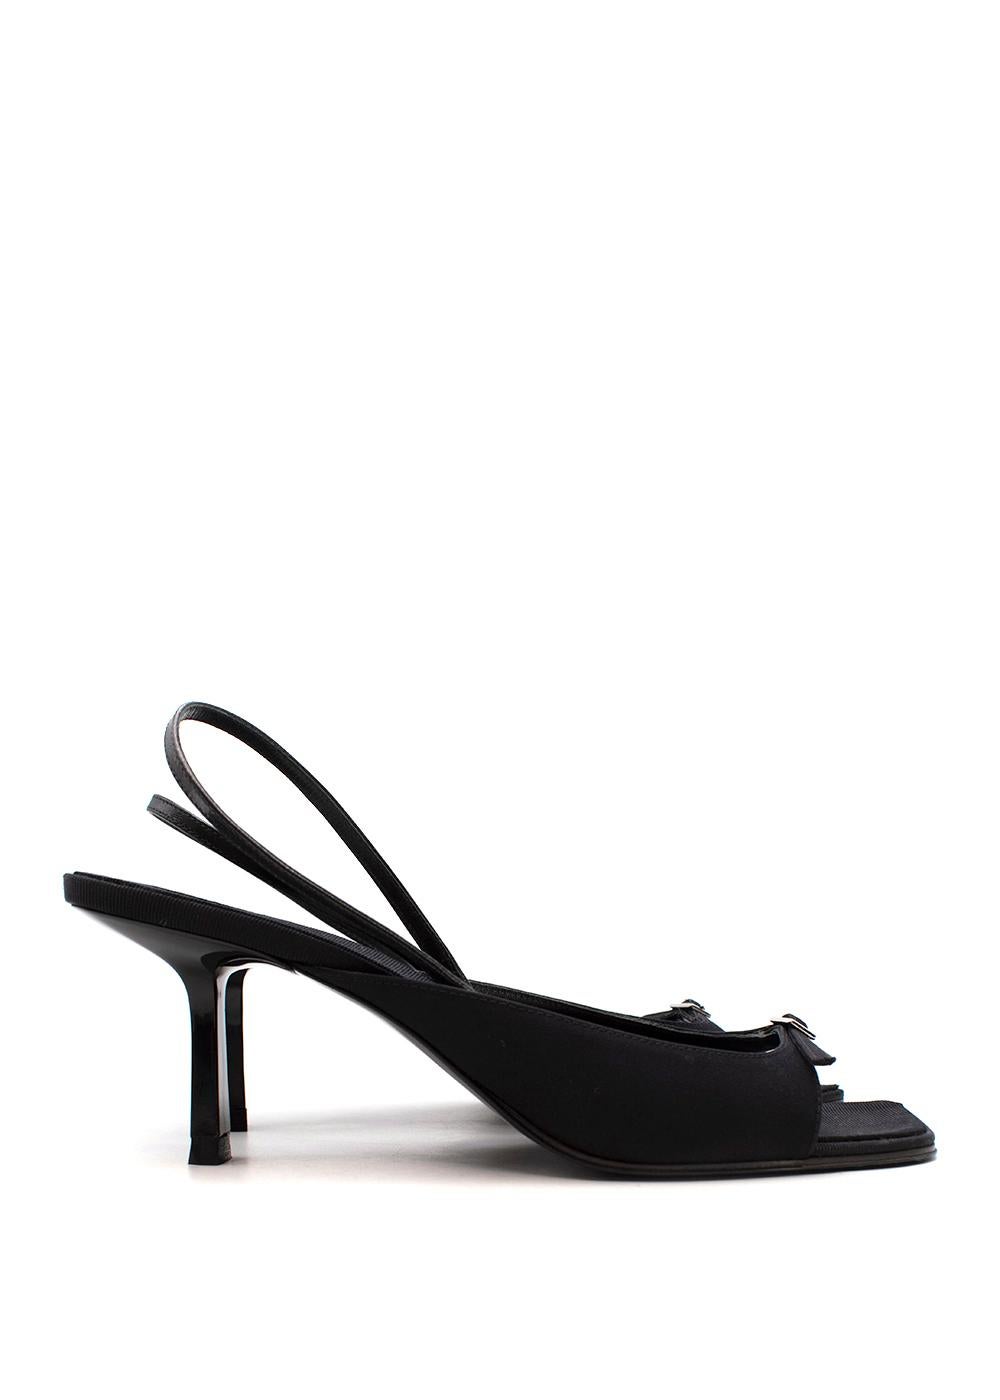 The Row Black Canvas & Leather Buckle-Front Slingback Heeled Sandals

- Minimal black canvas upper adorned with a small silver-tone metal buckle on the front of the foot
- Elasticated slingback strap 
- Set on a low stiletto heel
- Grosgrain lined